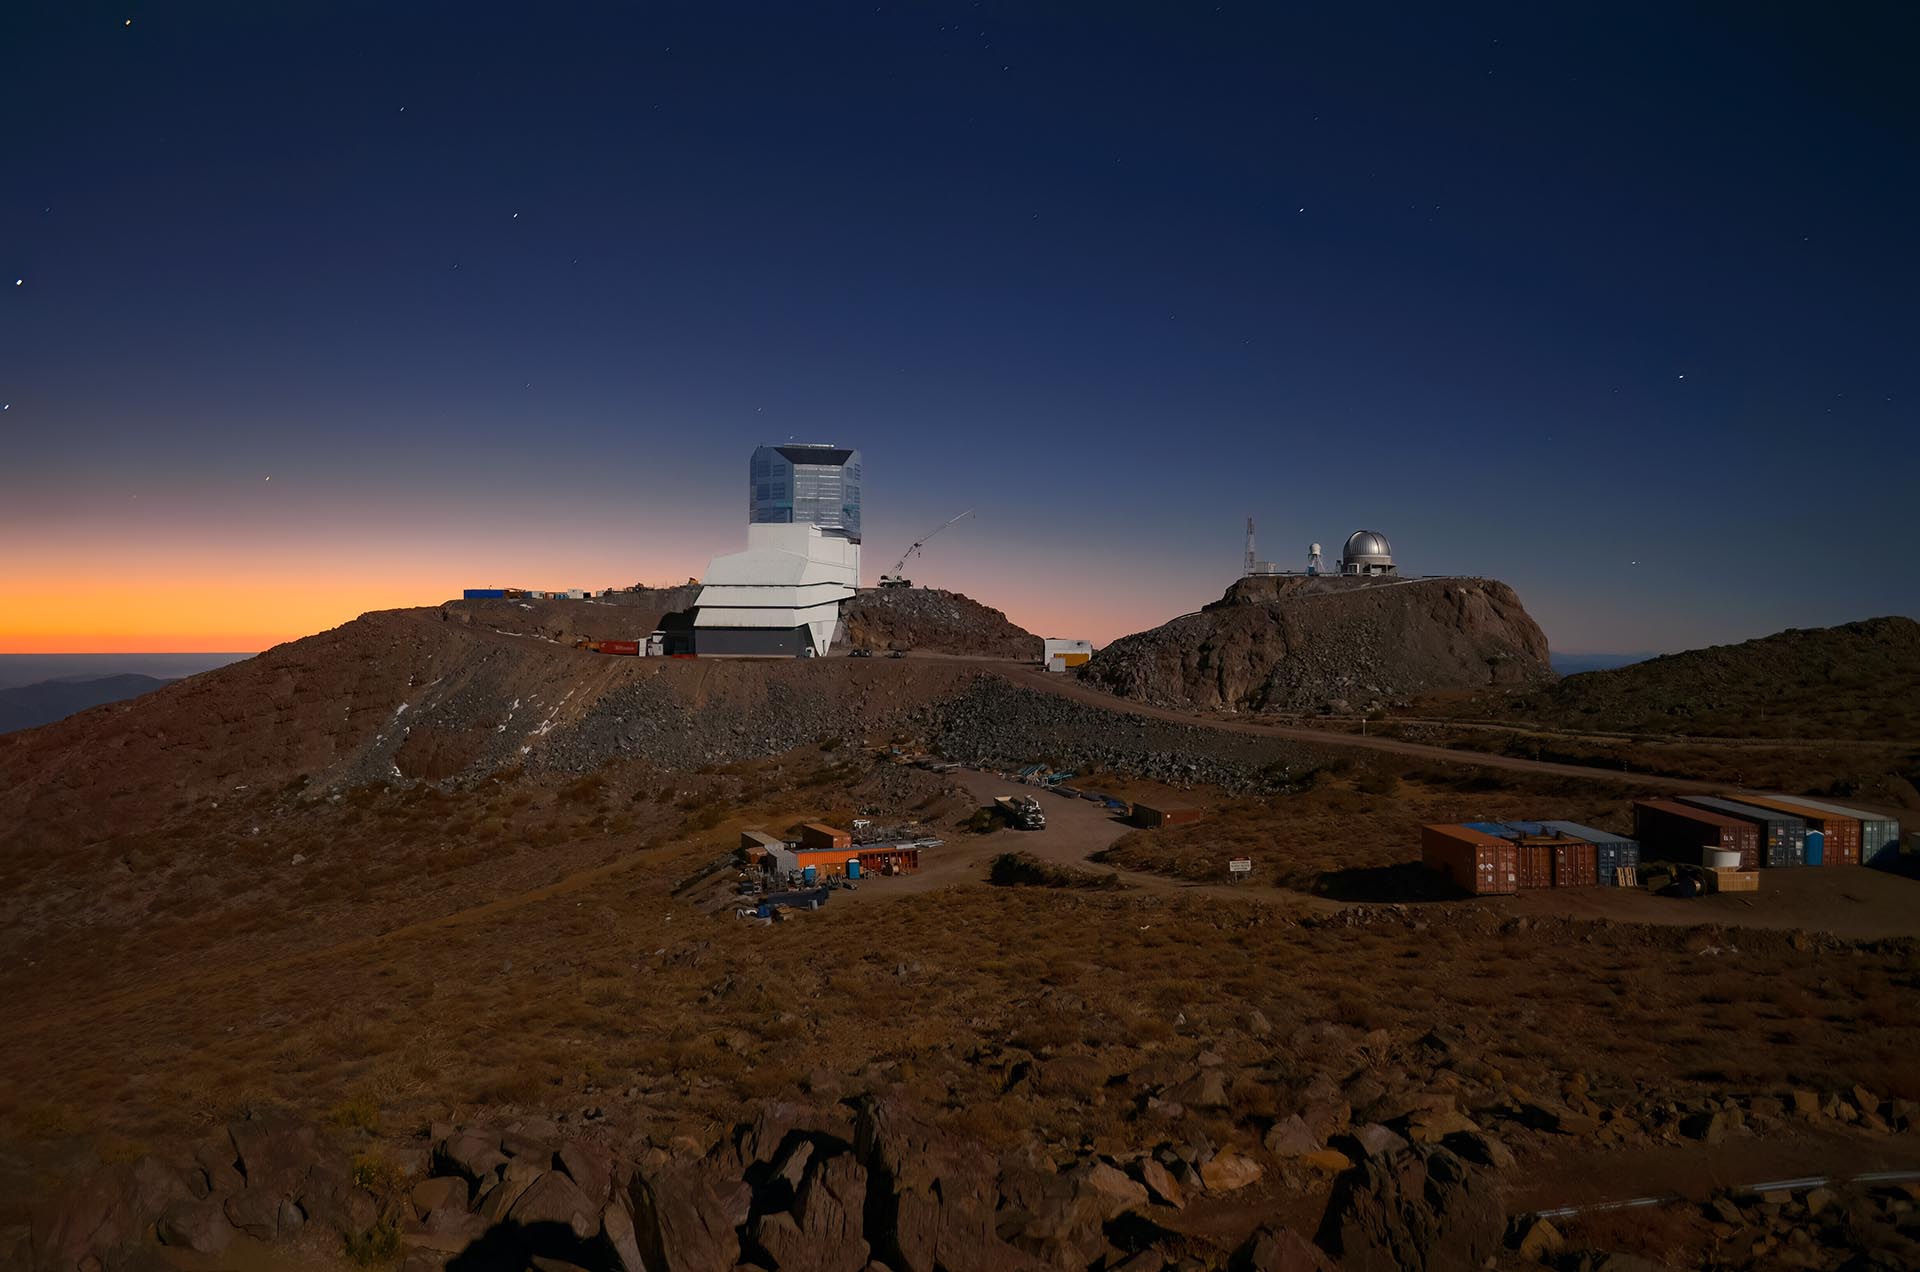 A white observatory building with a shiny silver dome sits on a rocky site under a dark late-twilight sky. A second small dome sits on a neighboring hill. The sky fills the top half of the image and is a uniform dark blue, with a hint of orange on the left horizon. Tiny pinpricks of stars are scattered in the sky. The brown, rocky desert landscape fills the bottom half of the image, darkened so that details are hard to pick out. A collection of shipping containers are lined up side by side in the lower right.